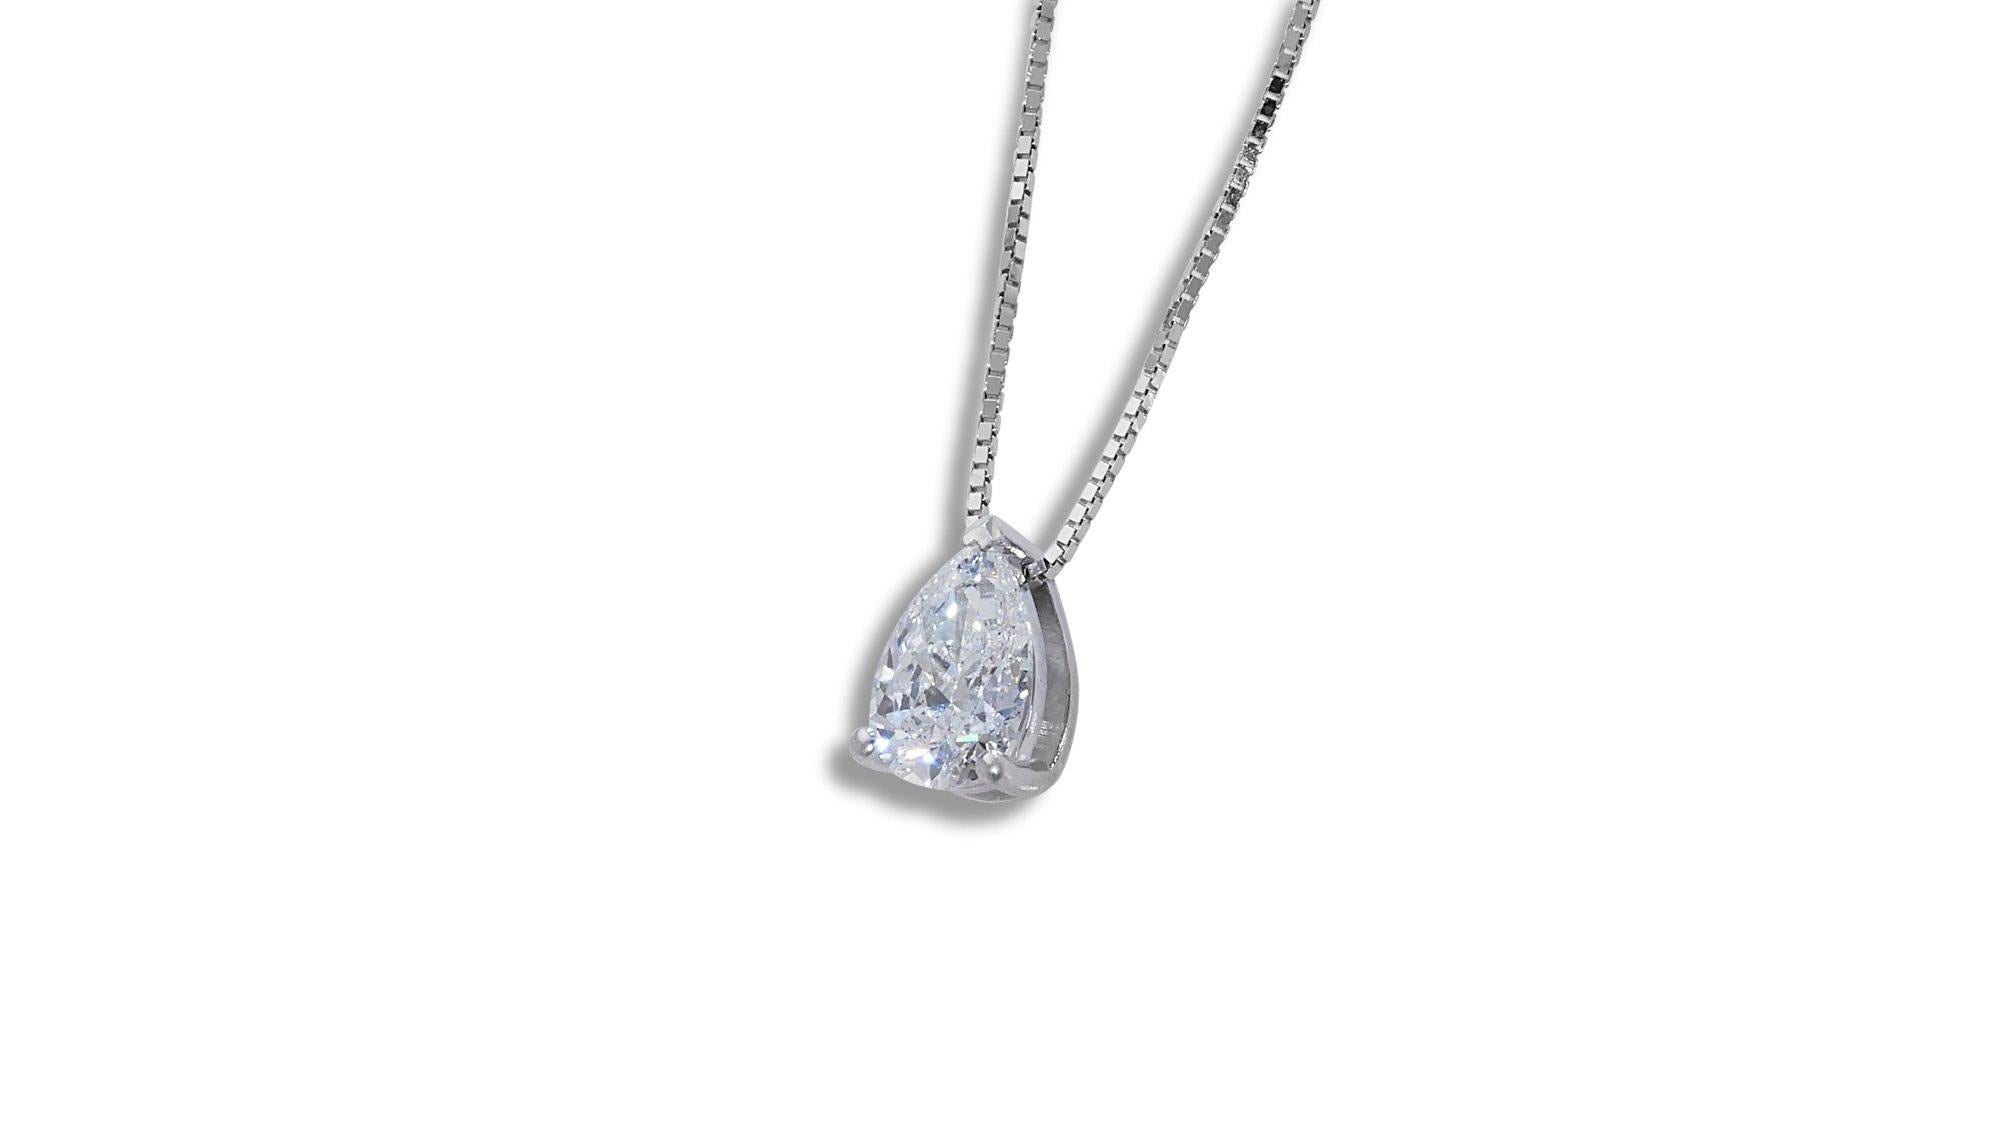 Women's Dazzling Necklace with a 0.90-carat Pear Brilliant Diamond For Sale